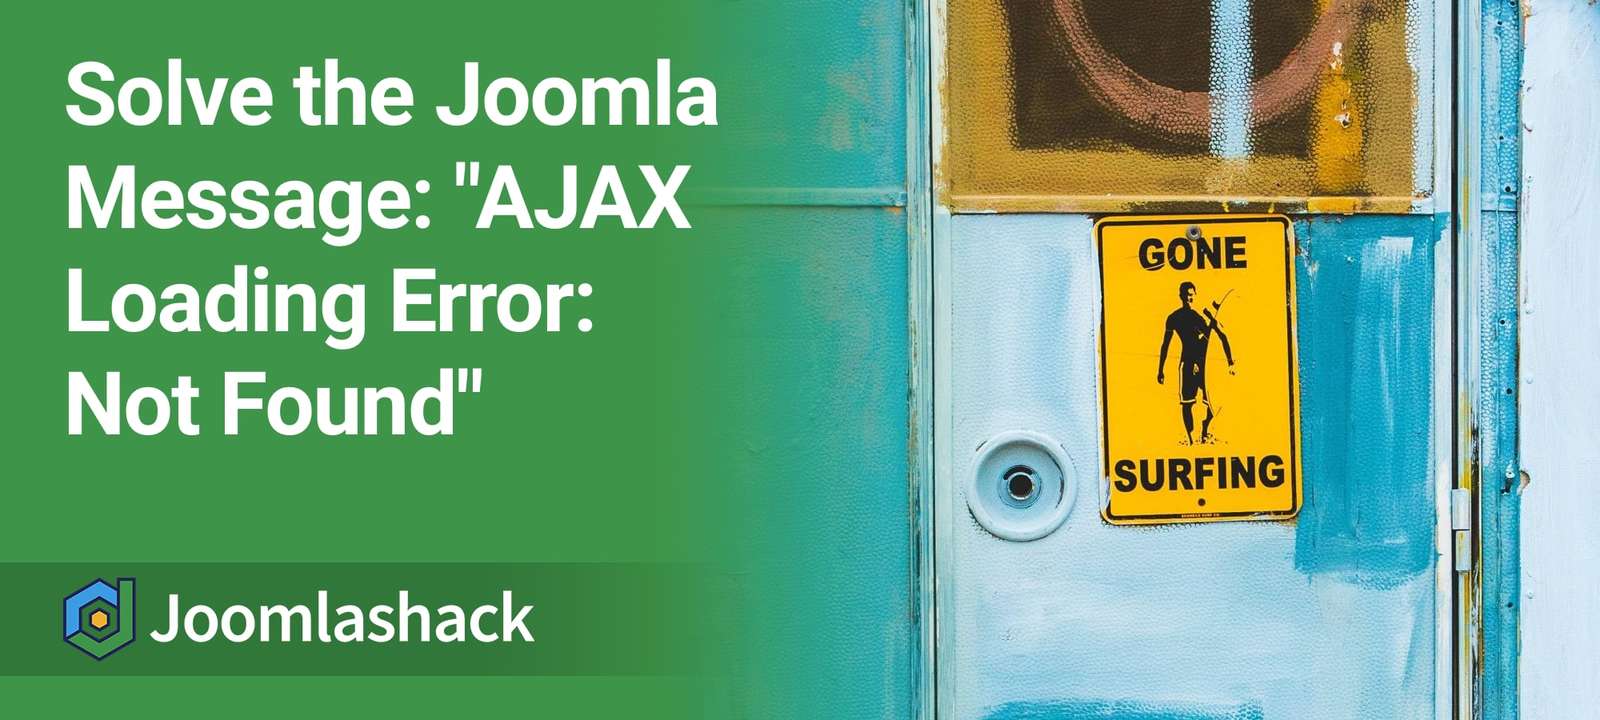 How to Solve the Joomla Message: "AJAX Loading Error: Not Found"